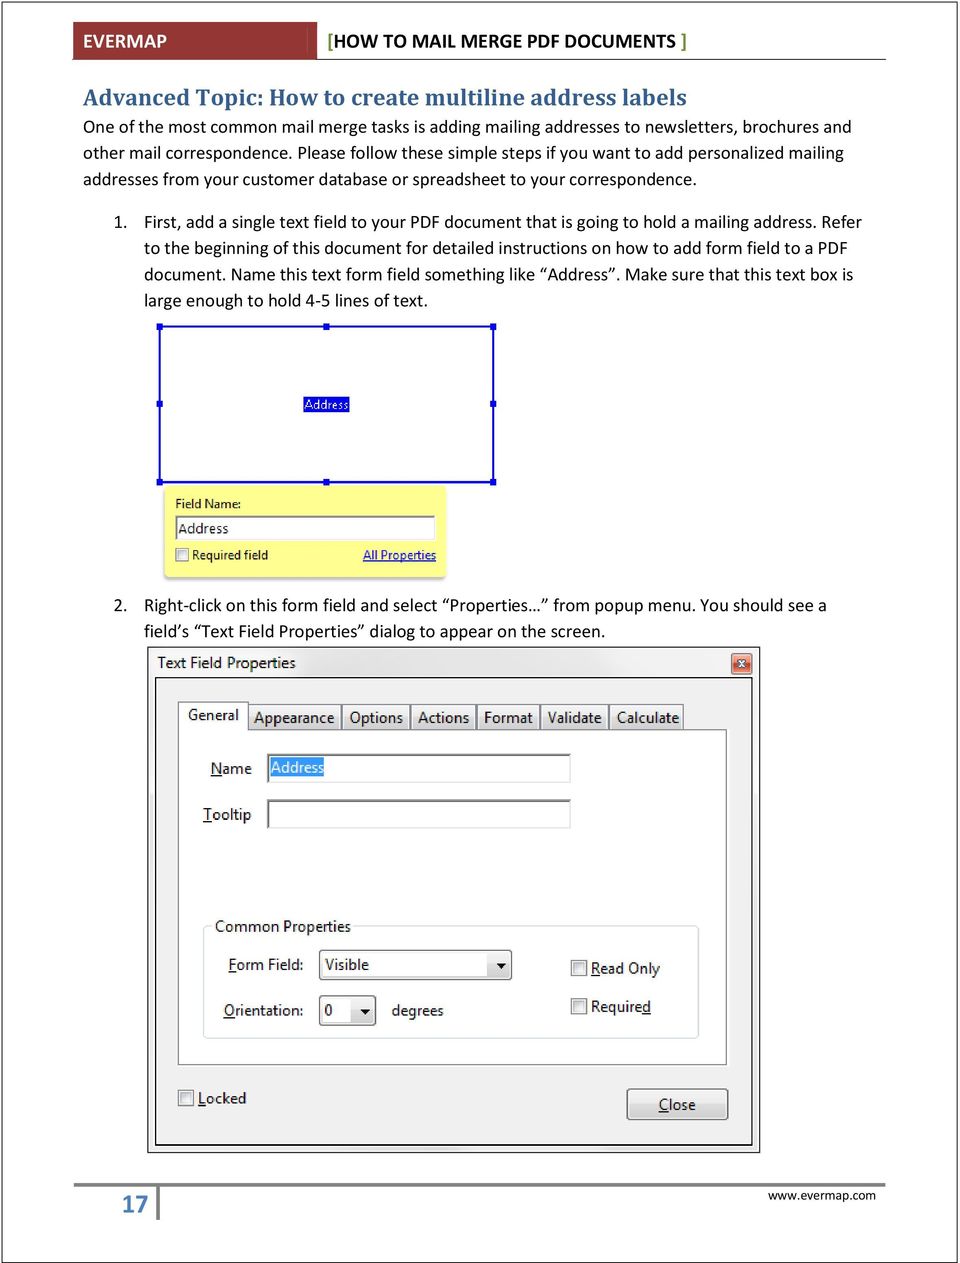 First, add a single text field to your PDF document that is going to hold a mailing address.